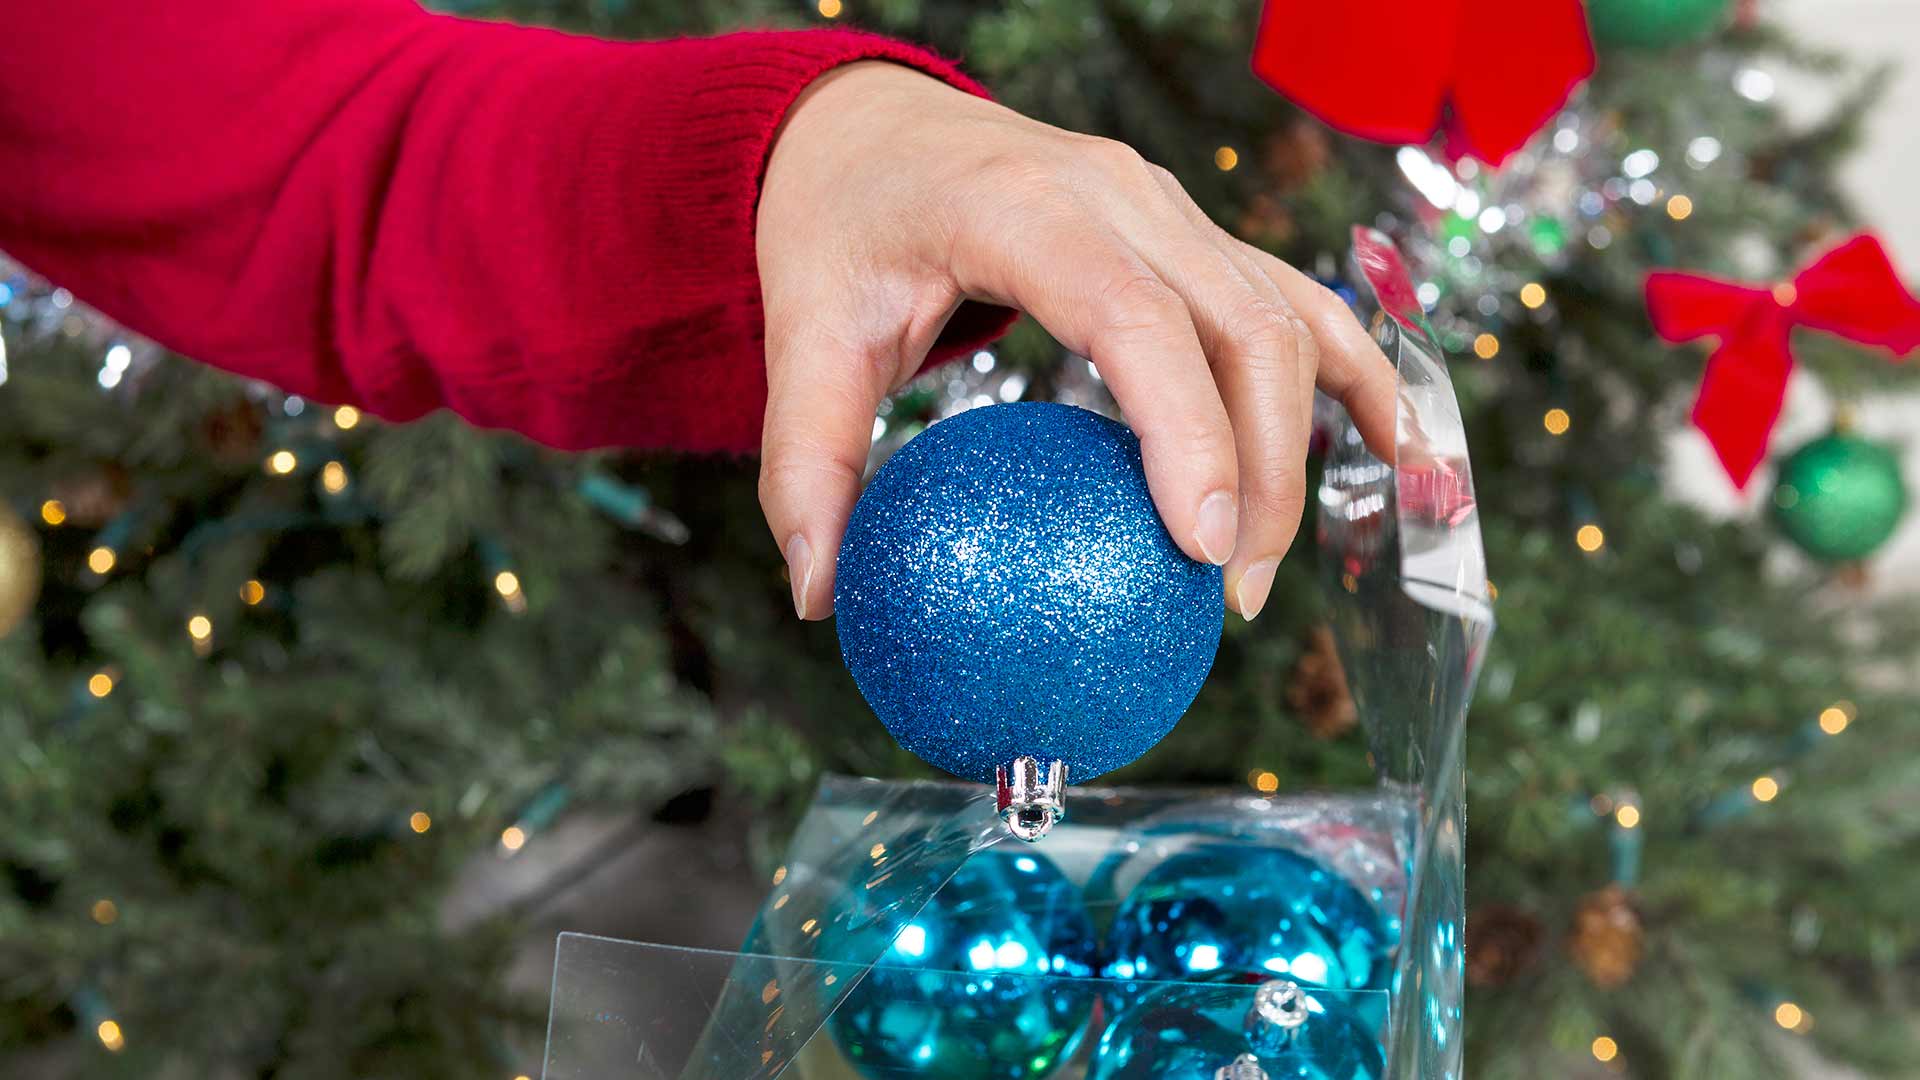 Storing Christmas ornaments in a clear plastic box